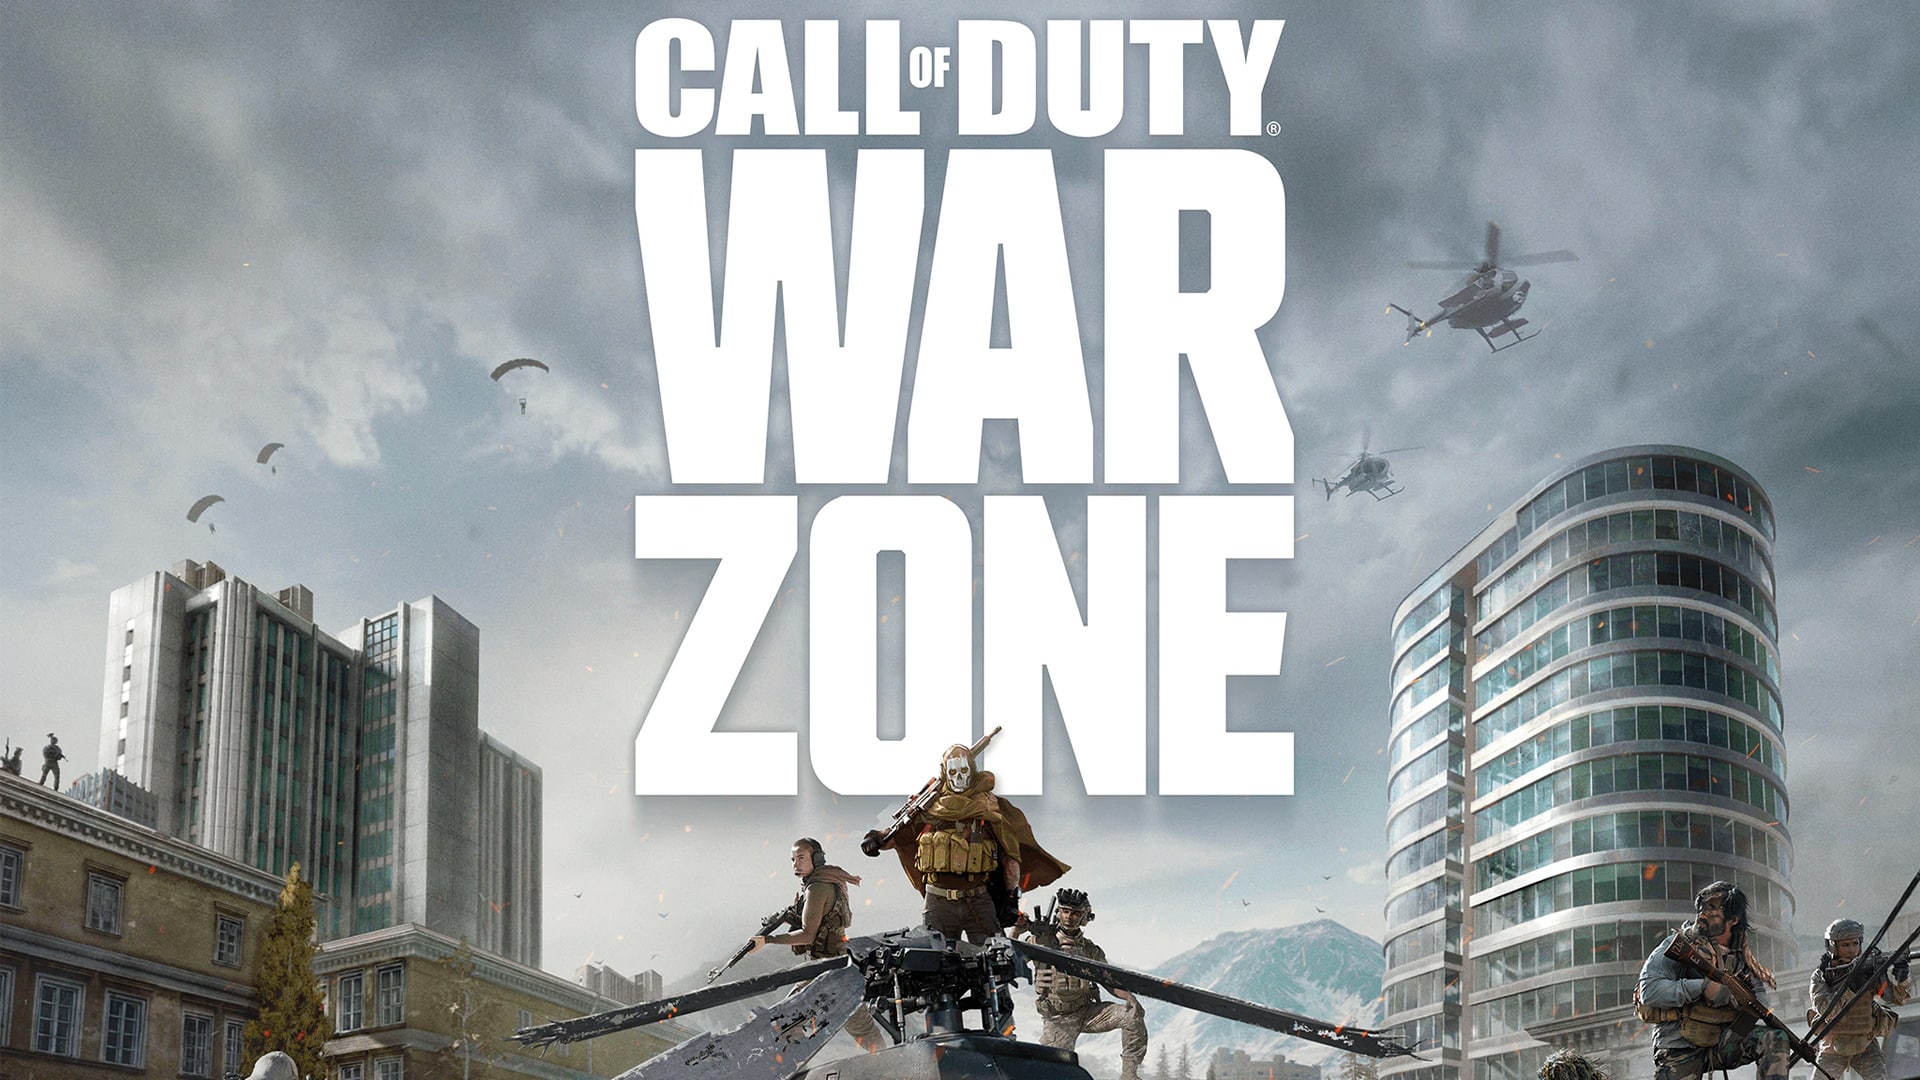 Call of duty warzone чит. Cod Price Warzone 2. Call of Duty Warzone logo. Баннер для ютуба Call of Duty Warzone 2.0.